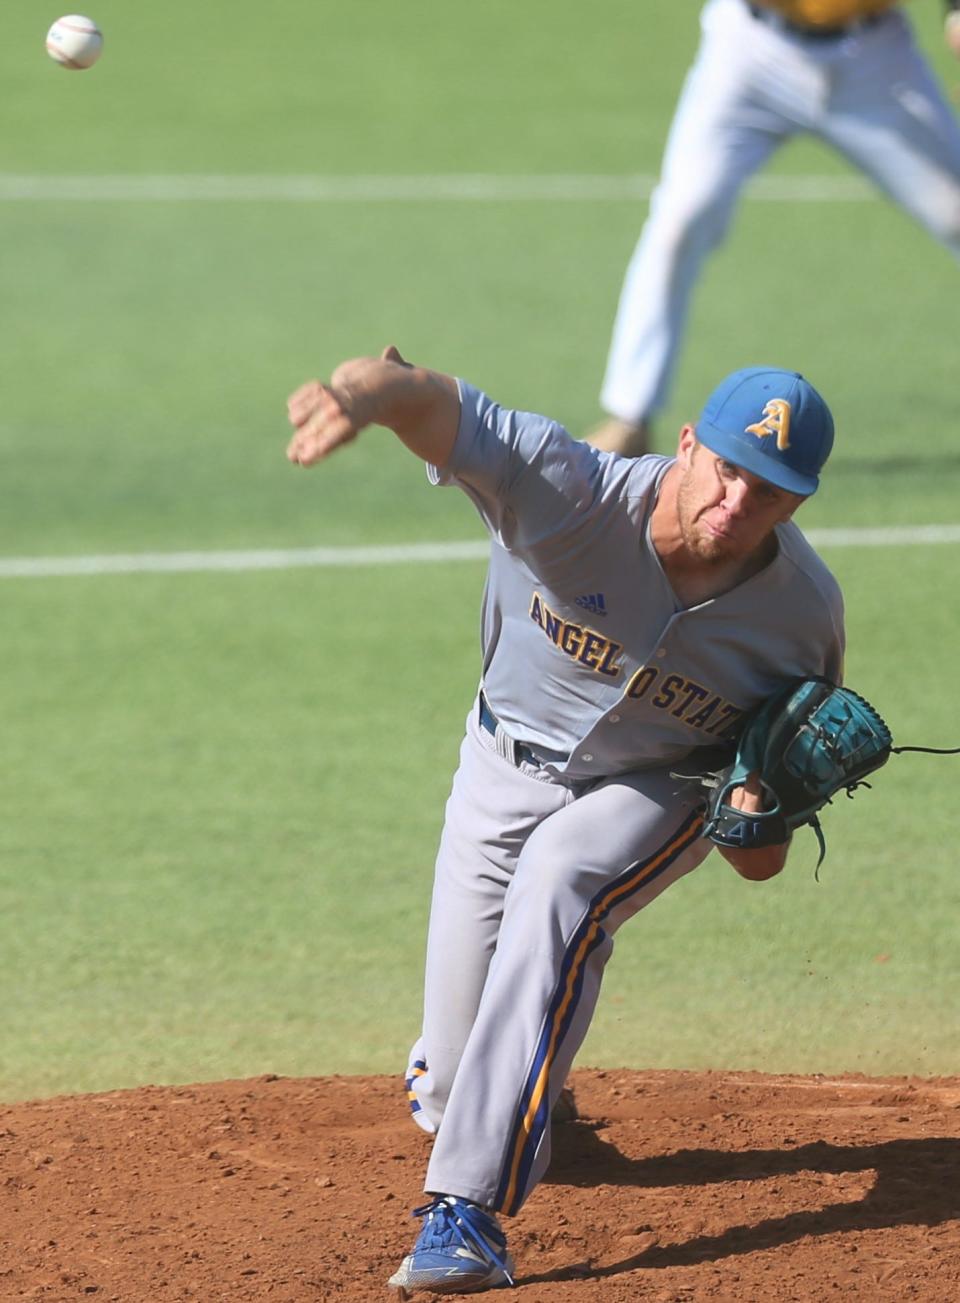 Angelo State University's Carson Childers fires a pitch against Texas A&M-Kingsville during the final game of the South Central Regional Section I Tournament at Foster Field at 1st Community Credit Union Stadium on Saturday, May 21, 2022.